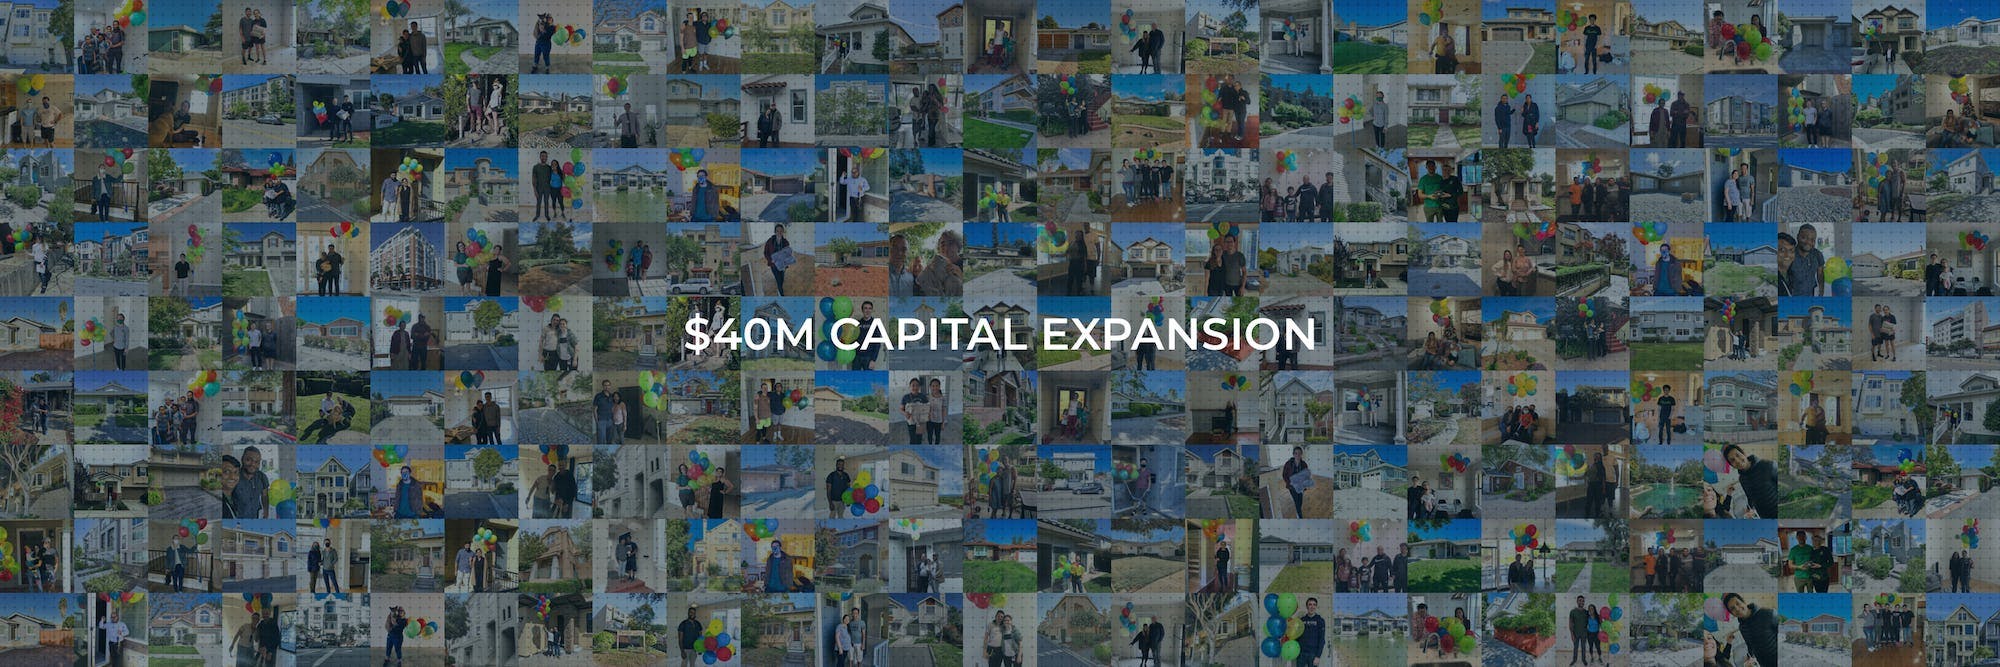 Mosaic image of Belong Home's success in raising $40M Capital expansion